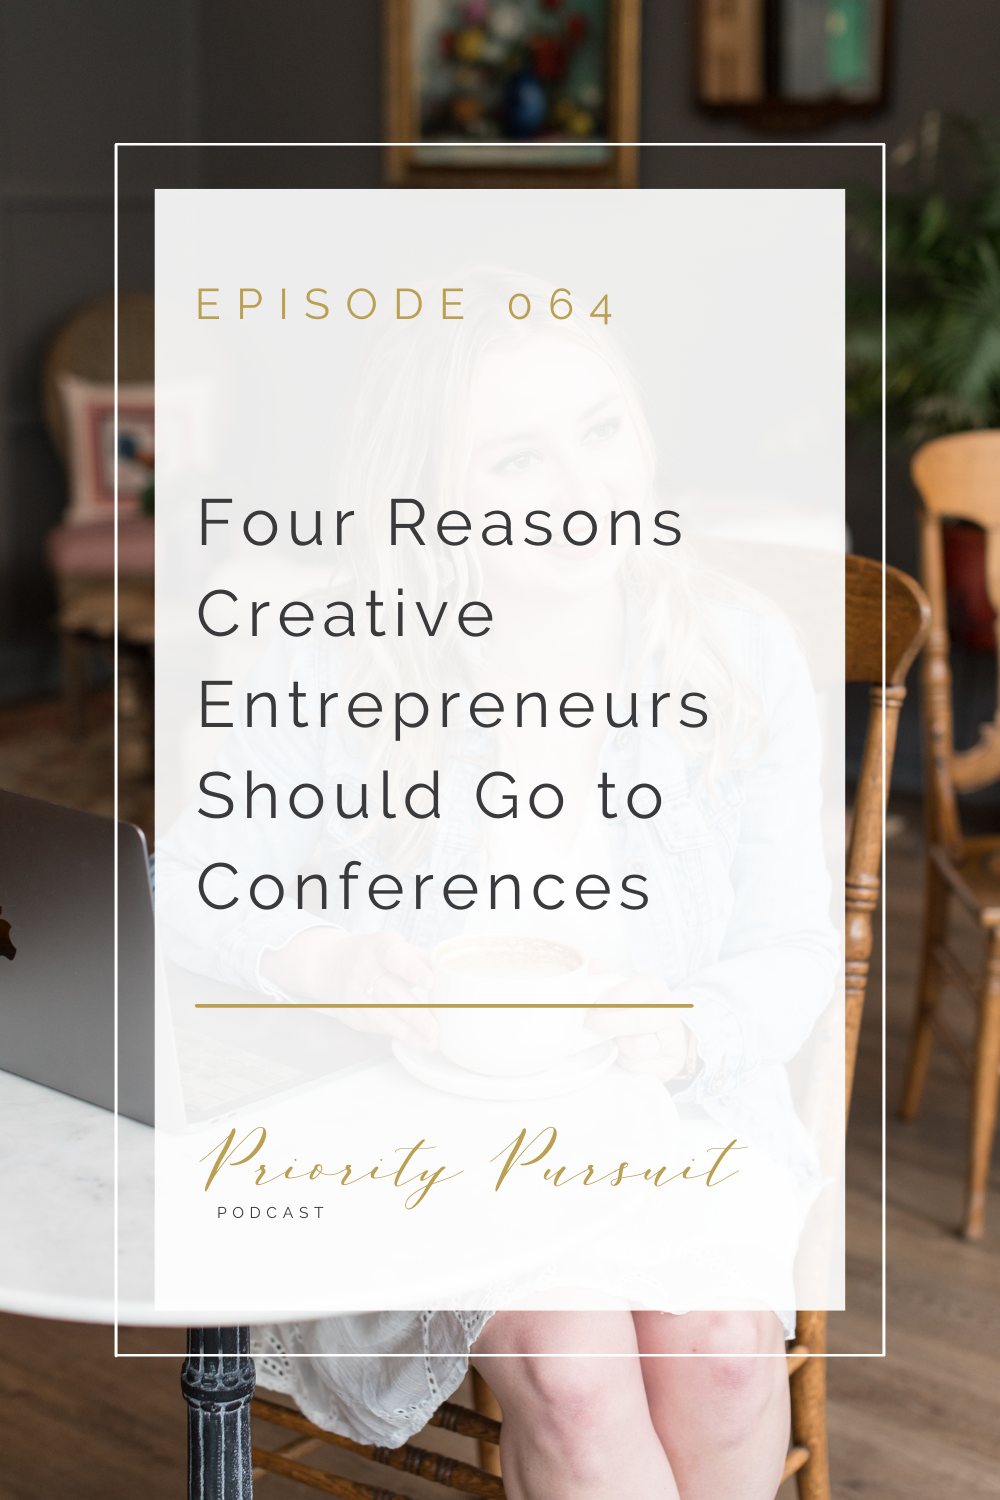 Victoria Rayburn explains four reasons creative entrepreneurs should go to conferences in this episode of “Priority Pursuit.” 